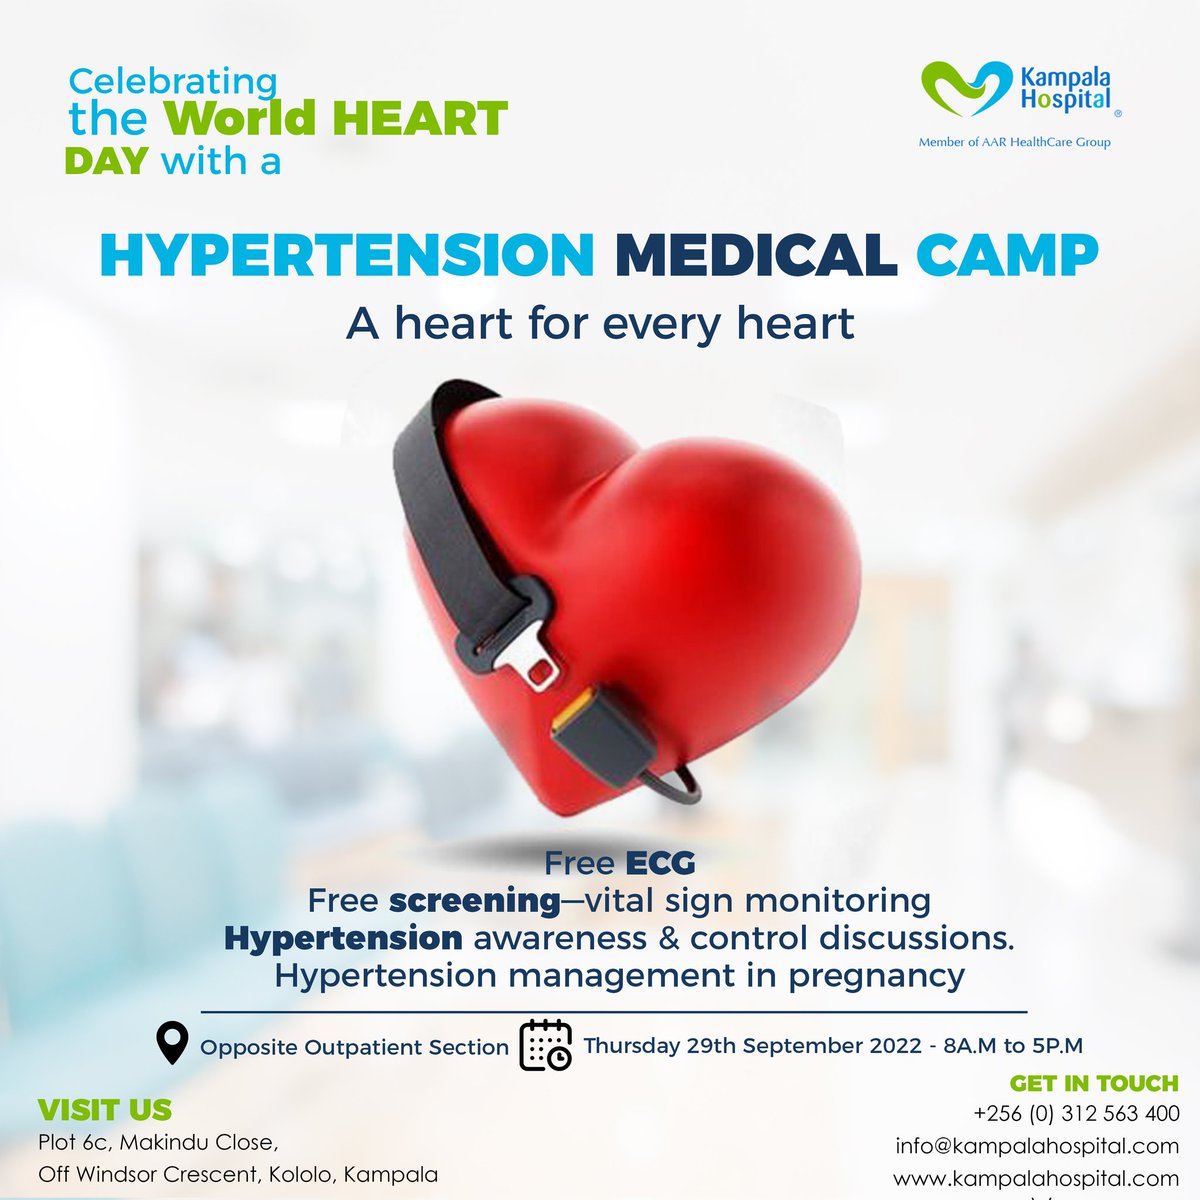 Leaving work? You can still passby @KlaHospital 

The free medical camp is still ongoing.
#LoveYourHeart
#KnowYourNumbers
#WorldHeartDay